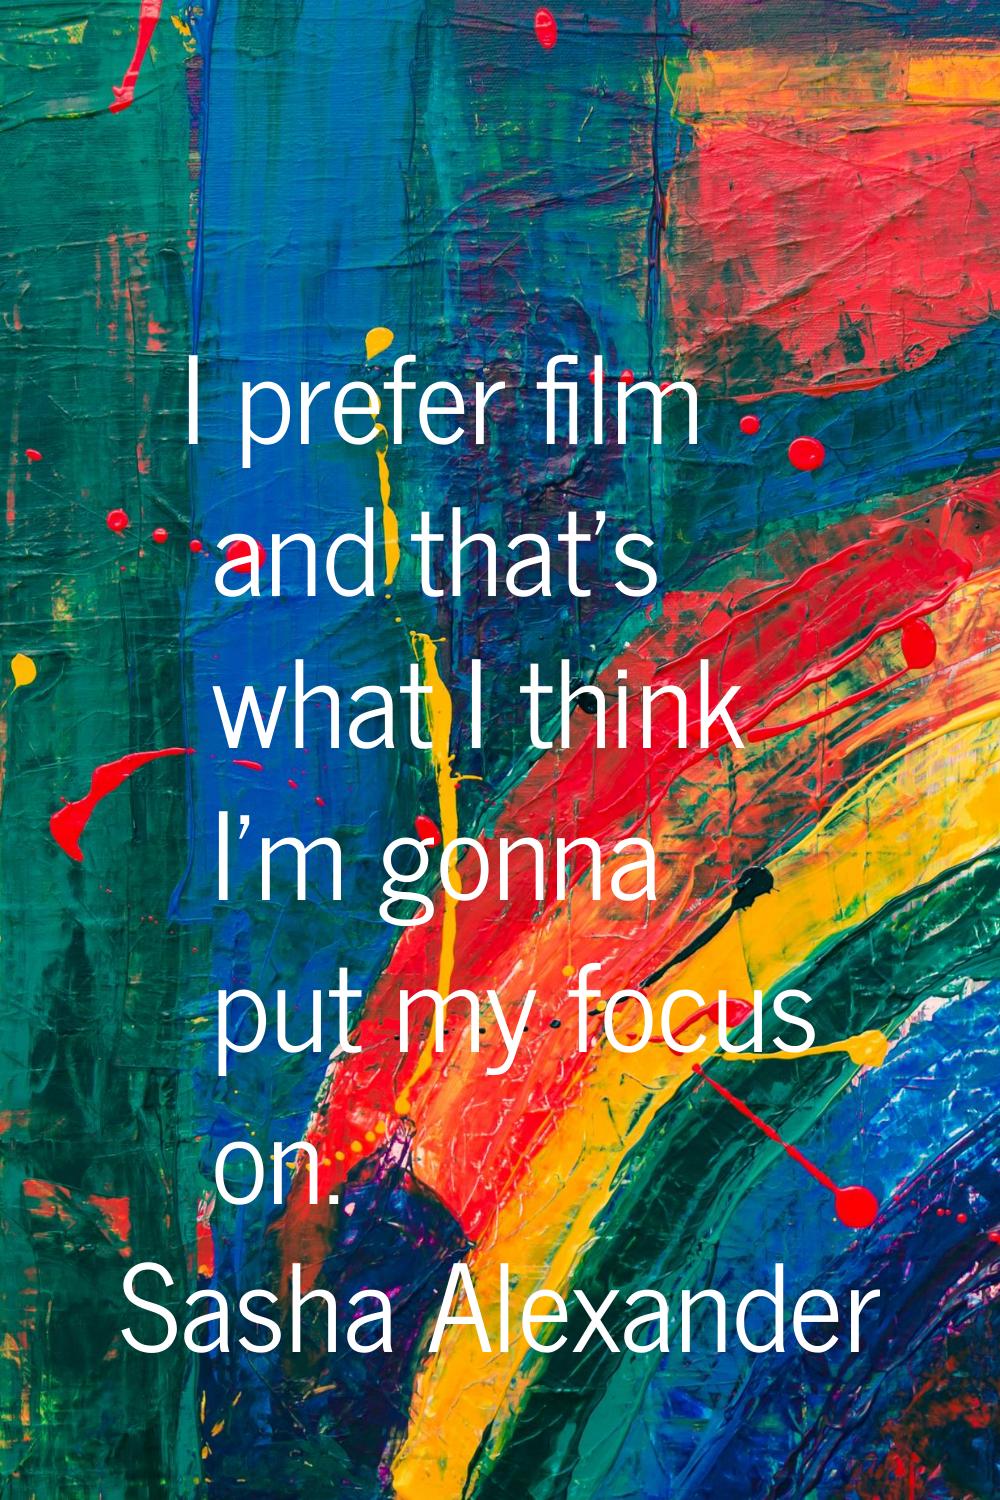 I prefer film and that's what I think I'm gonna put my focus on.